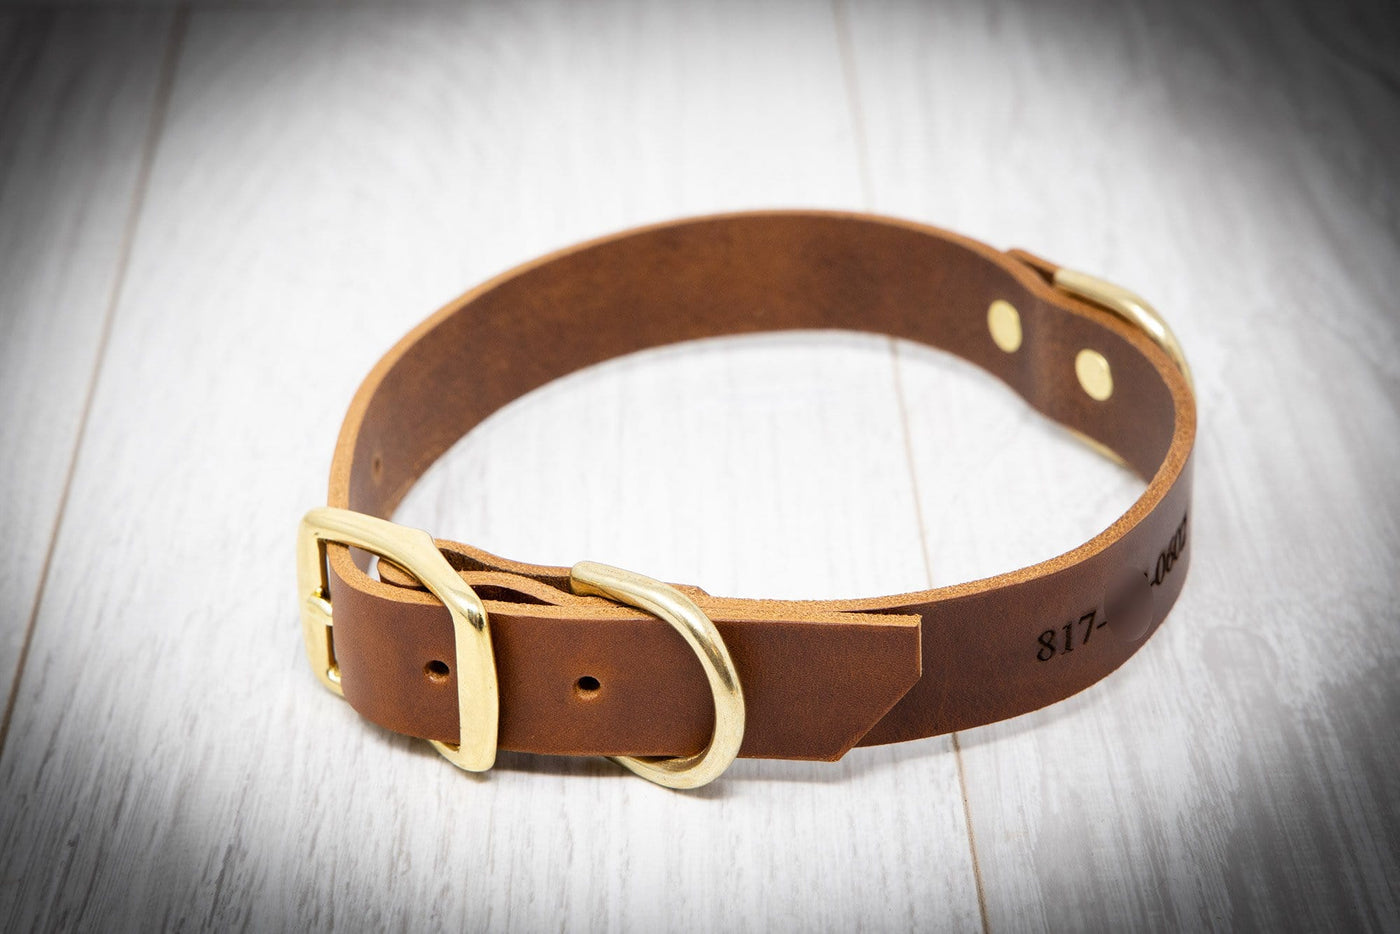 Leather Dog Collars - Personalized Leather Dog Collar